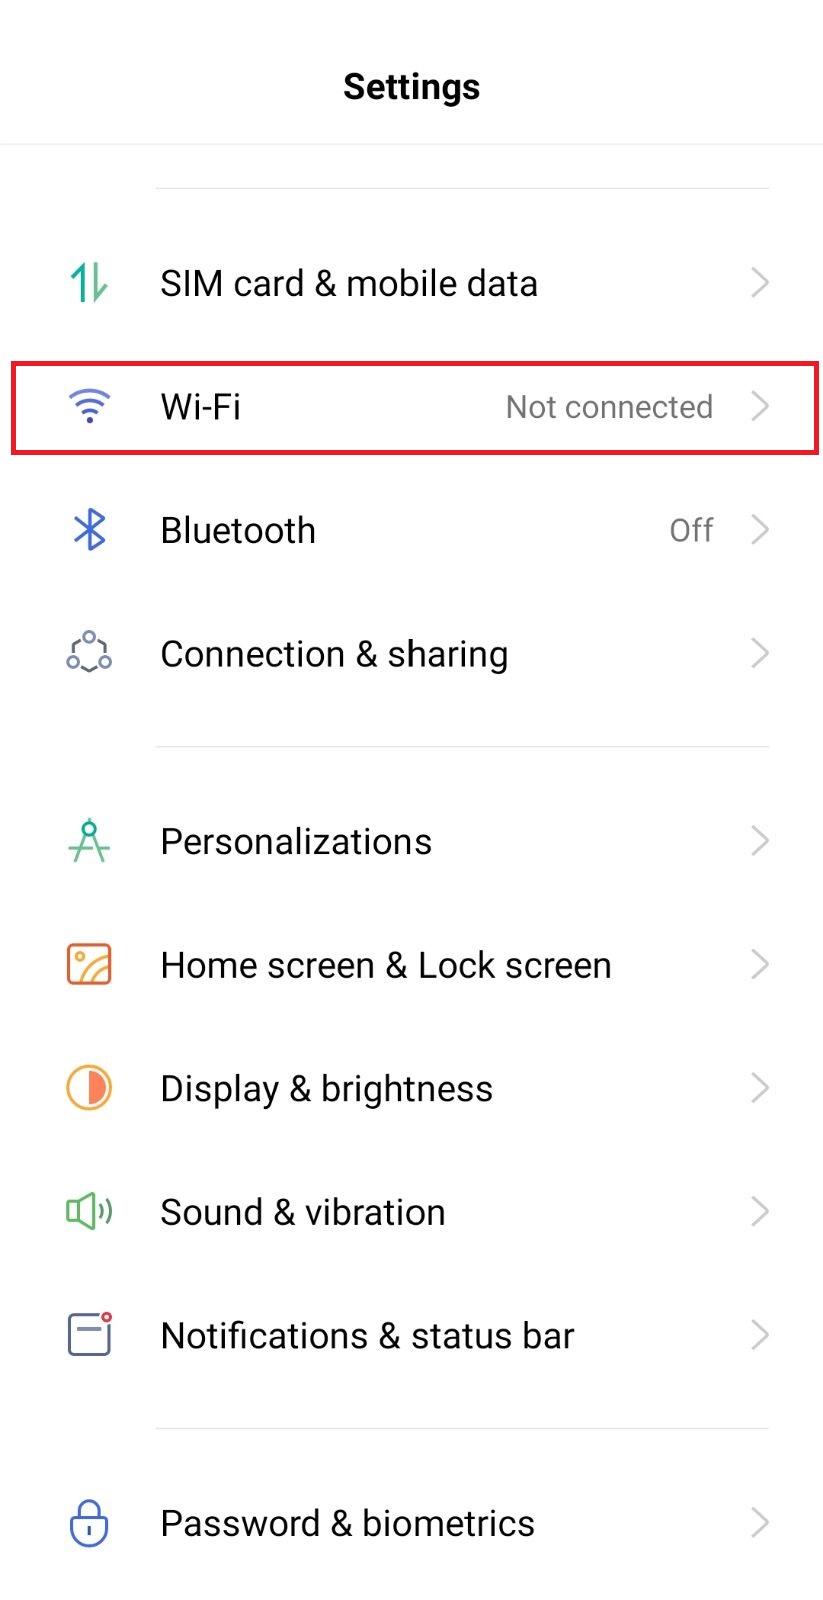 Go to the mobile WiFi settings to fix the Fire TV remote app not working